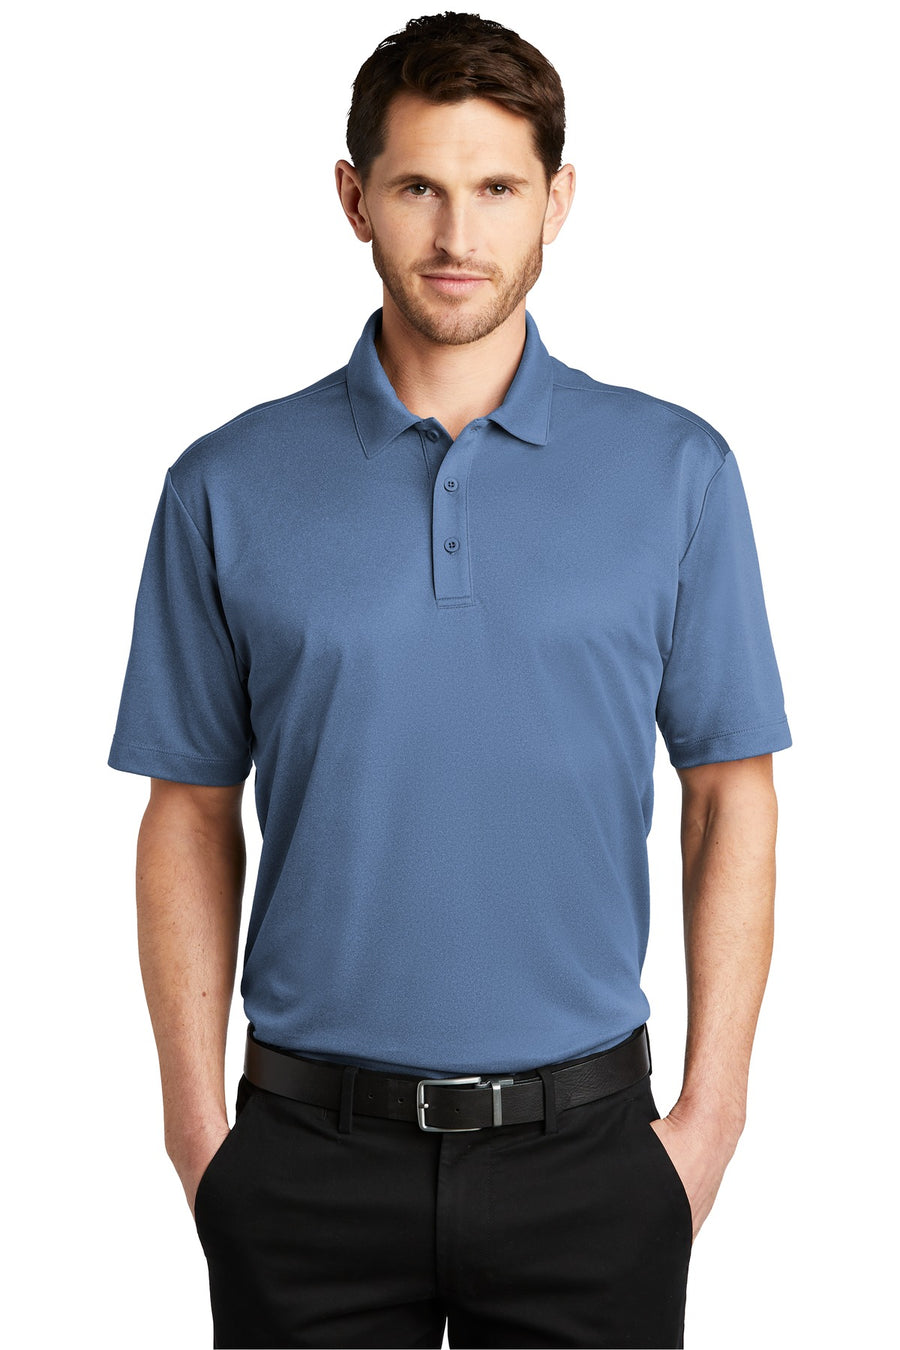 Port Authority Heathered Silk Touch Performance Polo.